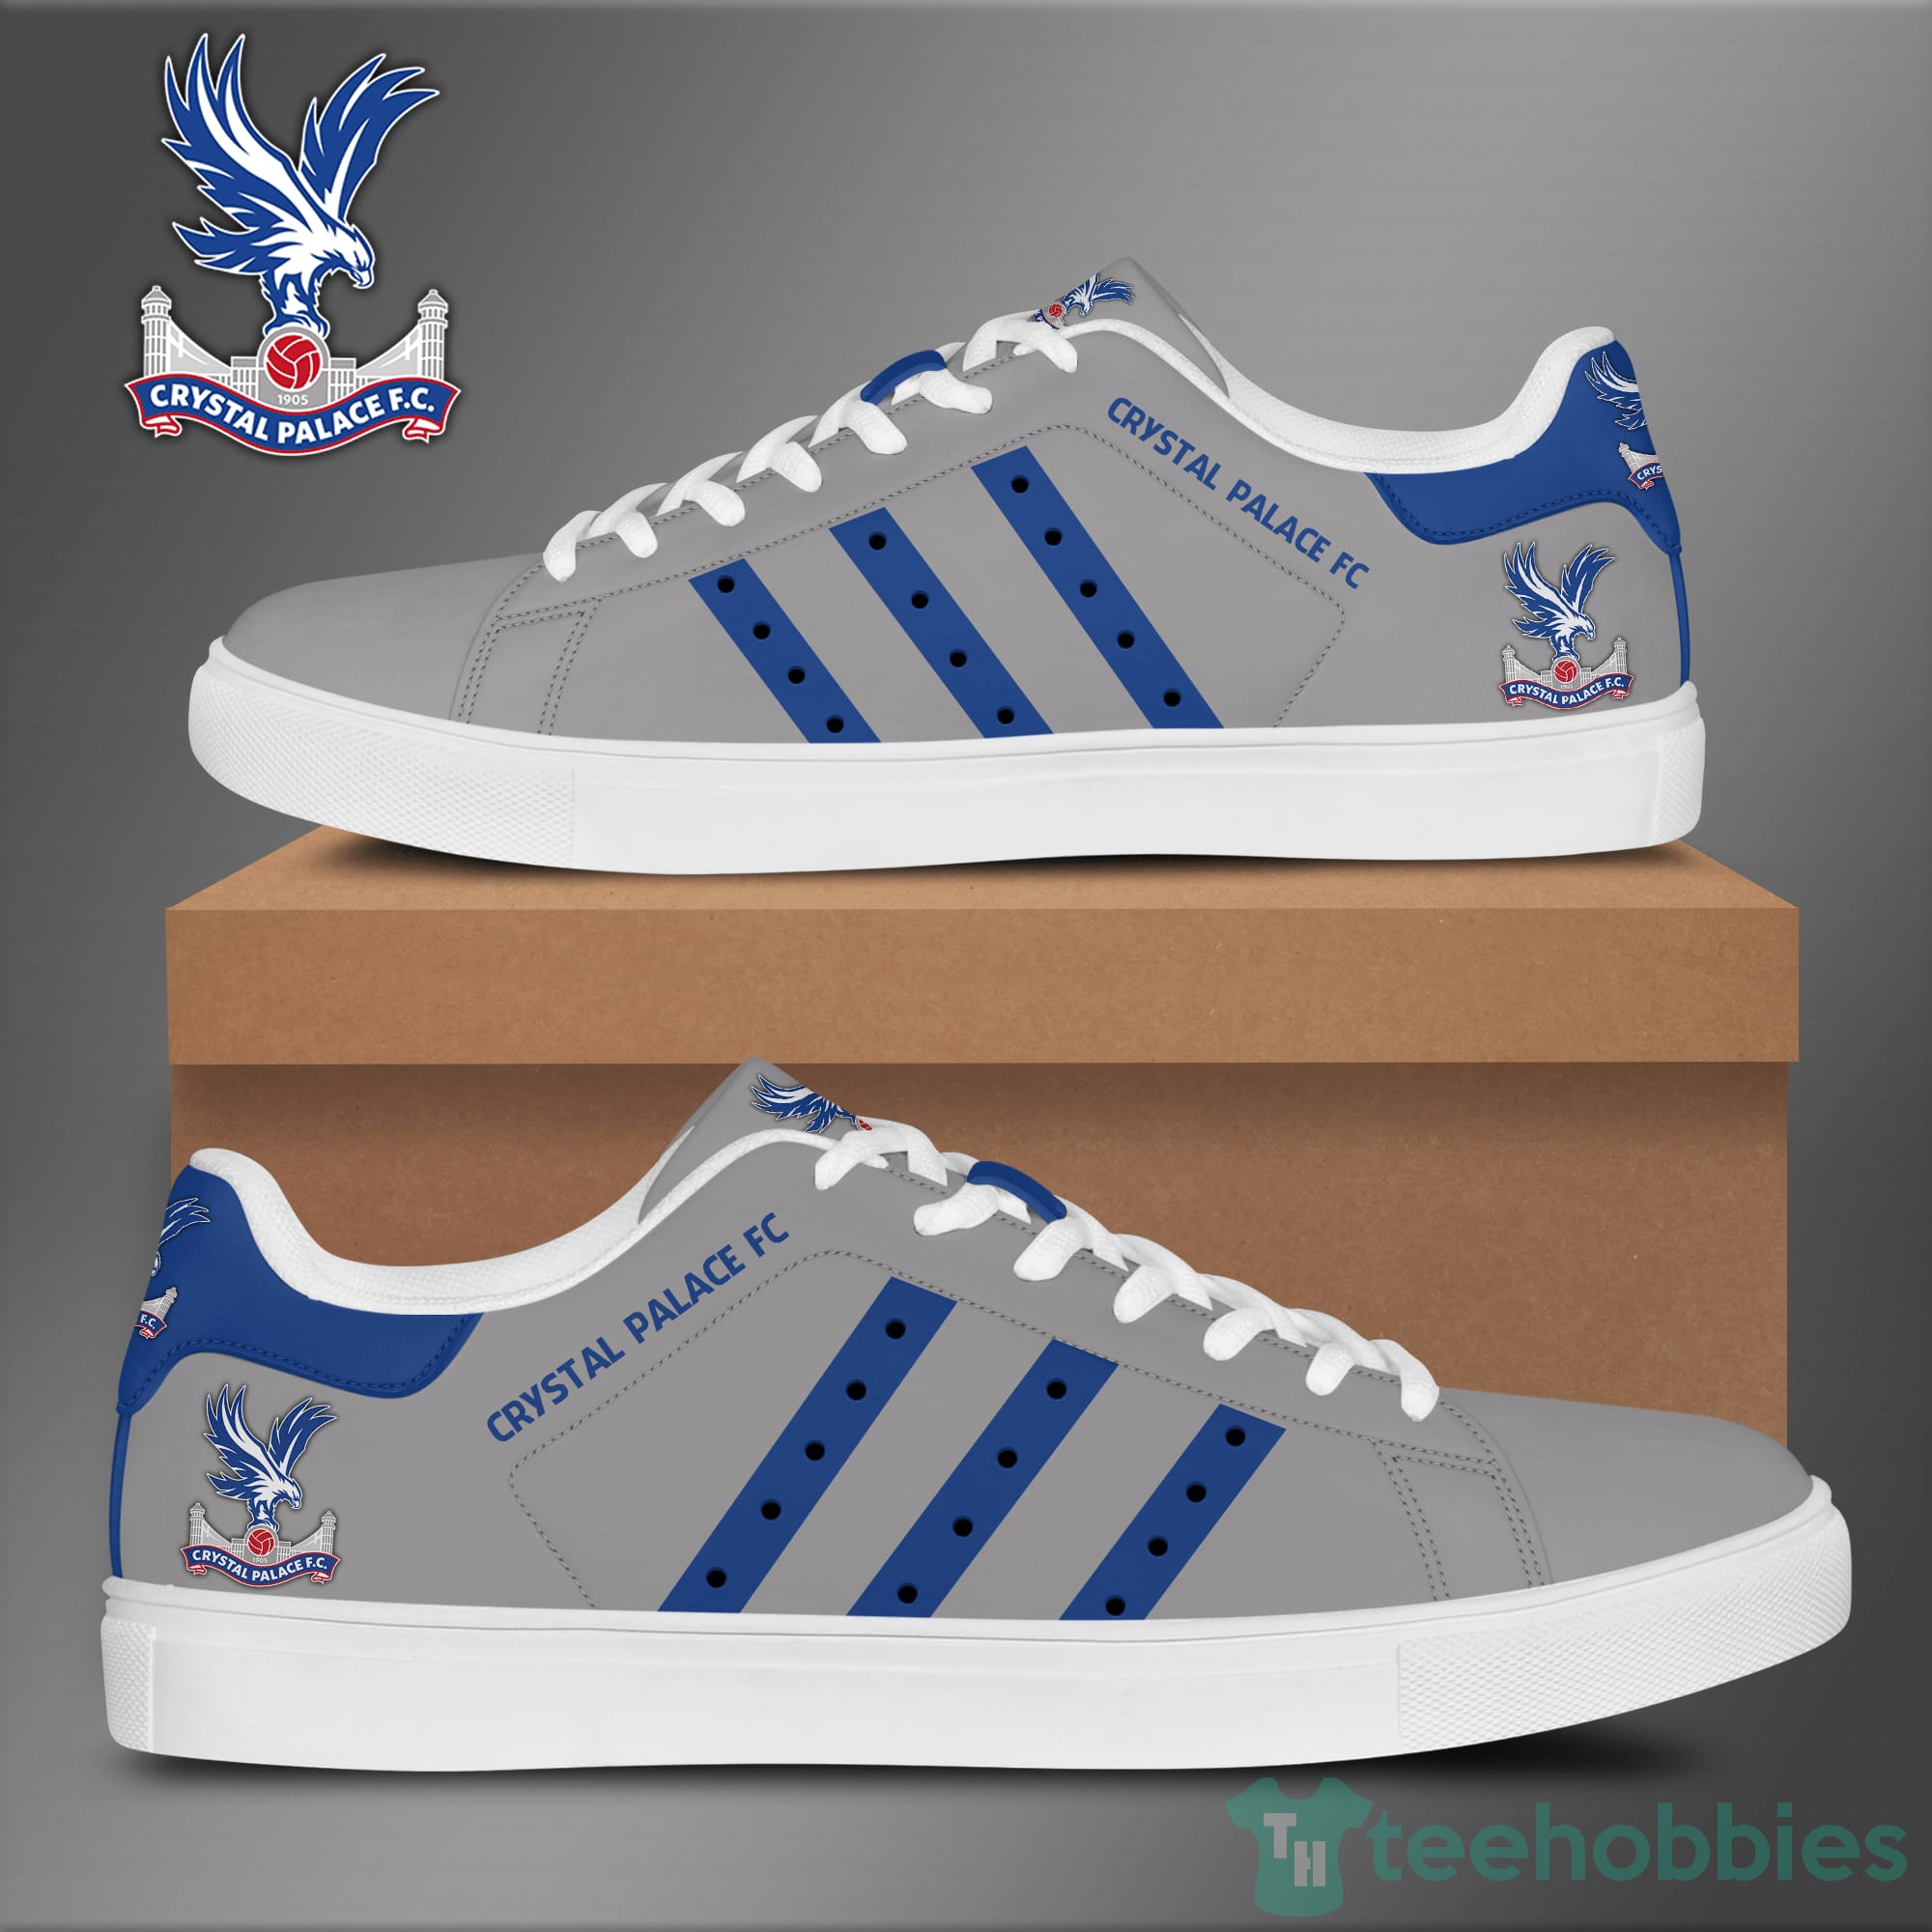 Crystal Palace Fc Low Top Skate Shoes Product photo 2